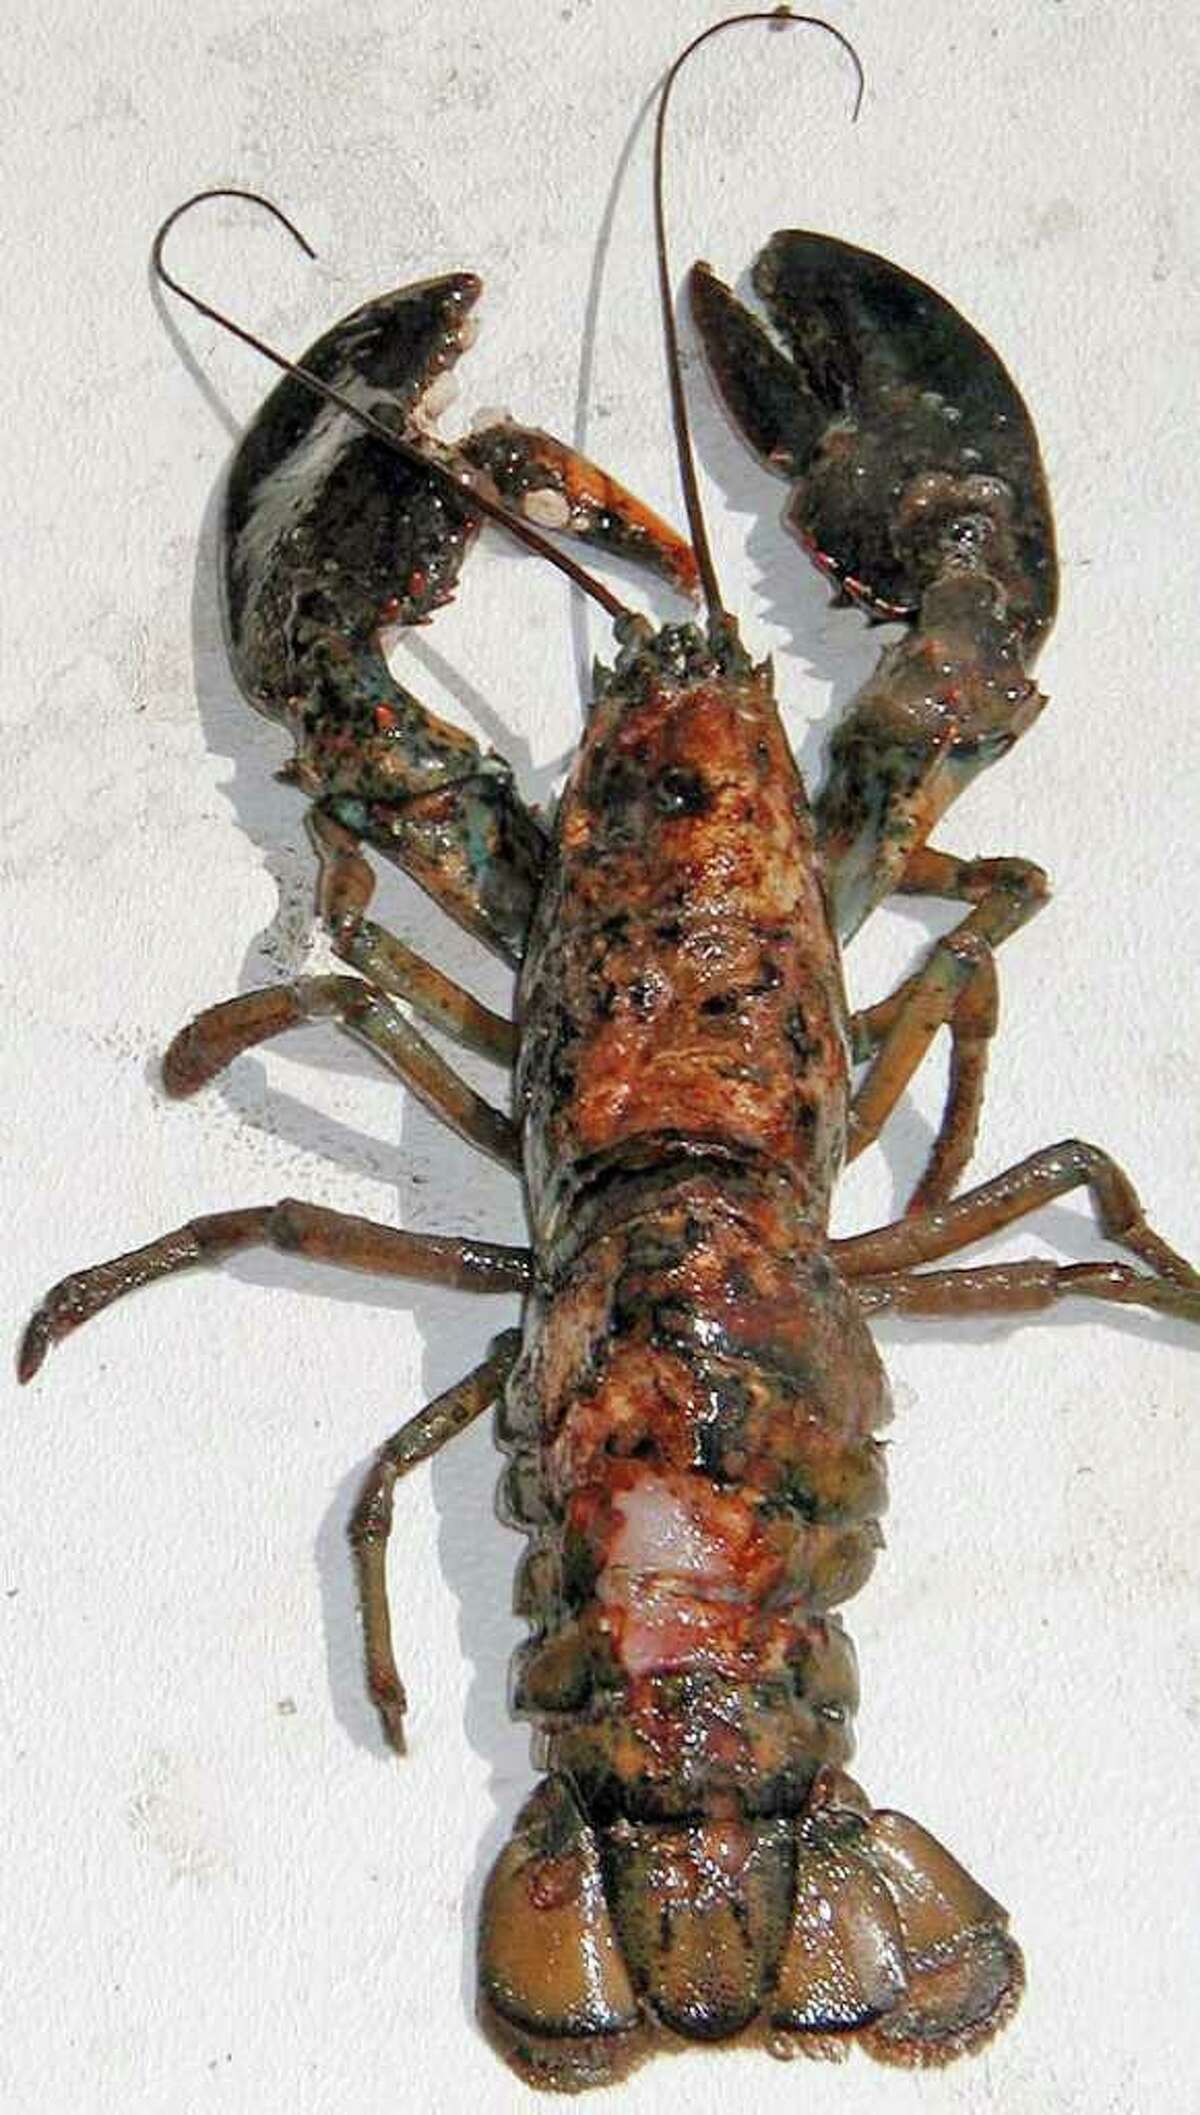 Scientists believe that lobster shell disease, in which the animal’s is eaten by bacteria, is caused by chemicals in plastics, paints and detergents that upset the delicate balance of hormones that governs molting and other functions. (Rhode Island Sea Grant)